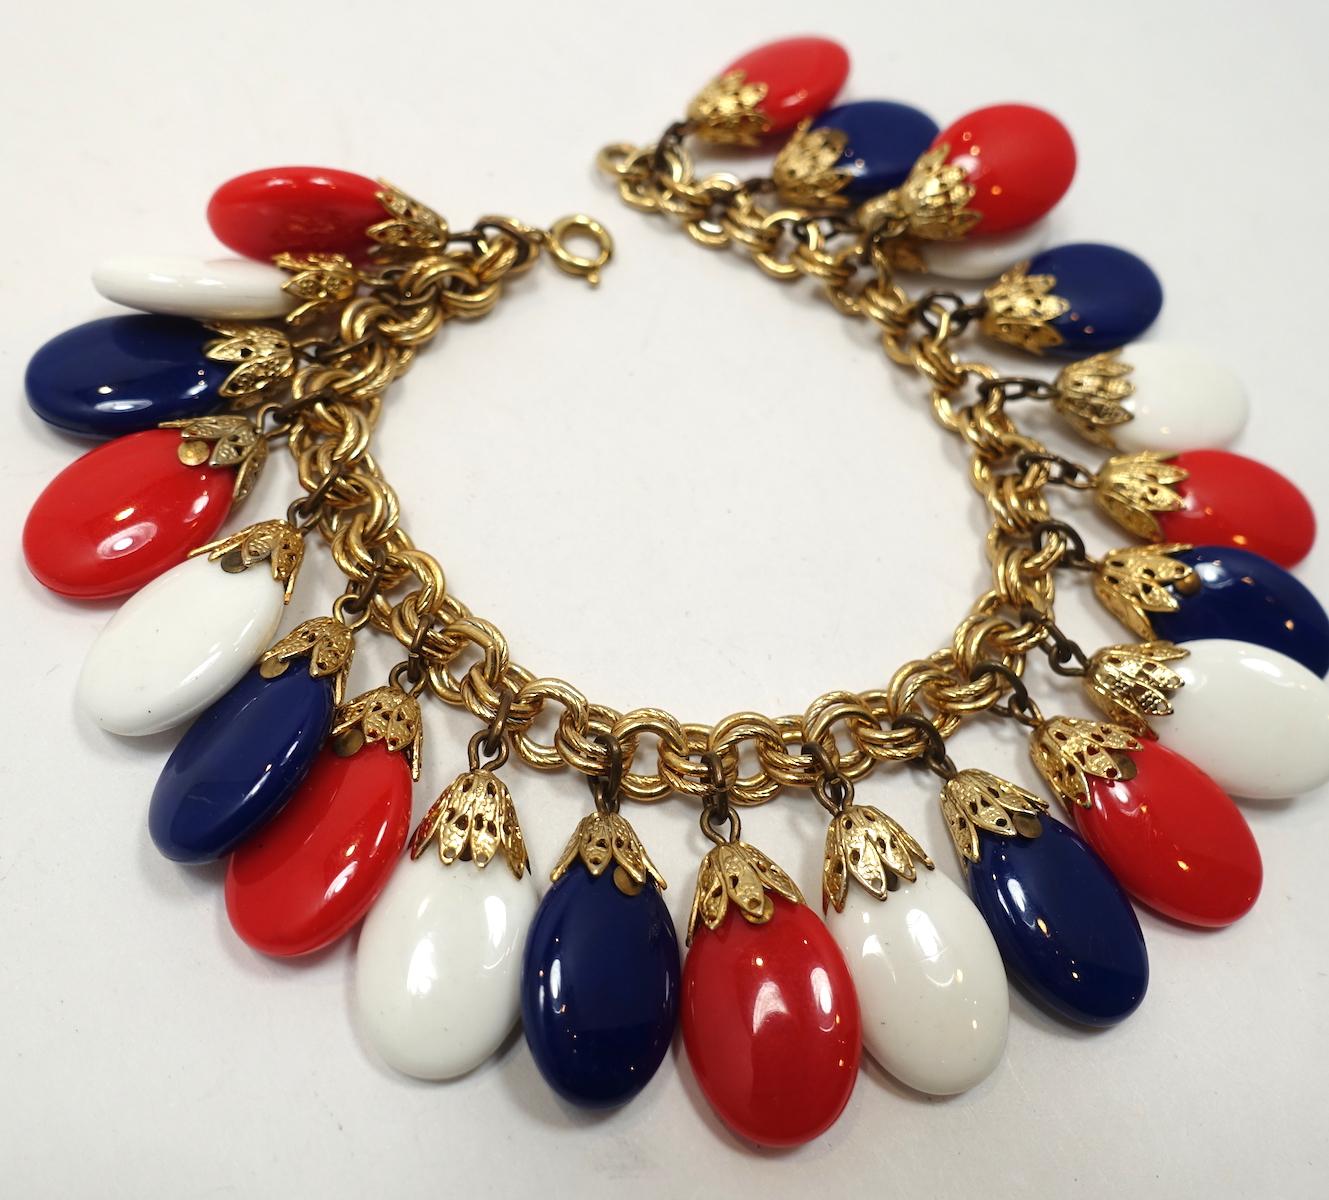 This vintage signed Napier bracelet features red, white and blue plastic drops in a gold tone setting.  In excellent condition, this bracelet measures 7-1/2” long with a spring closure. Each drop is 3/4” x 1/2” and is signed “Napier”.  It is in